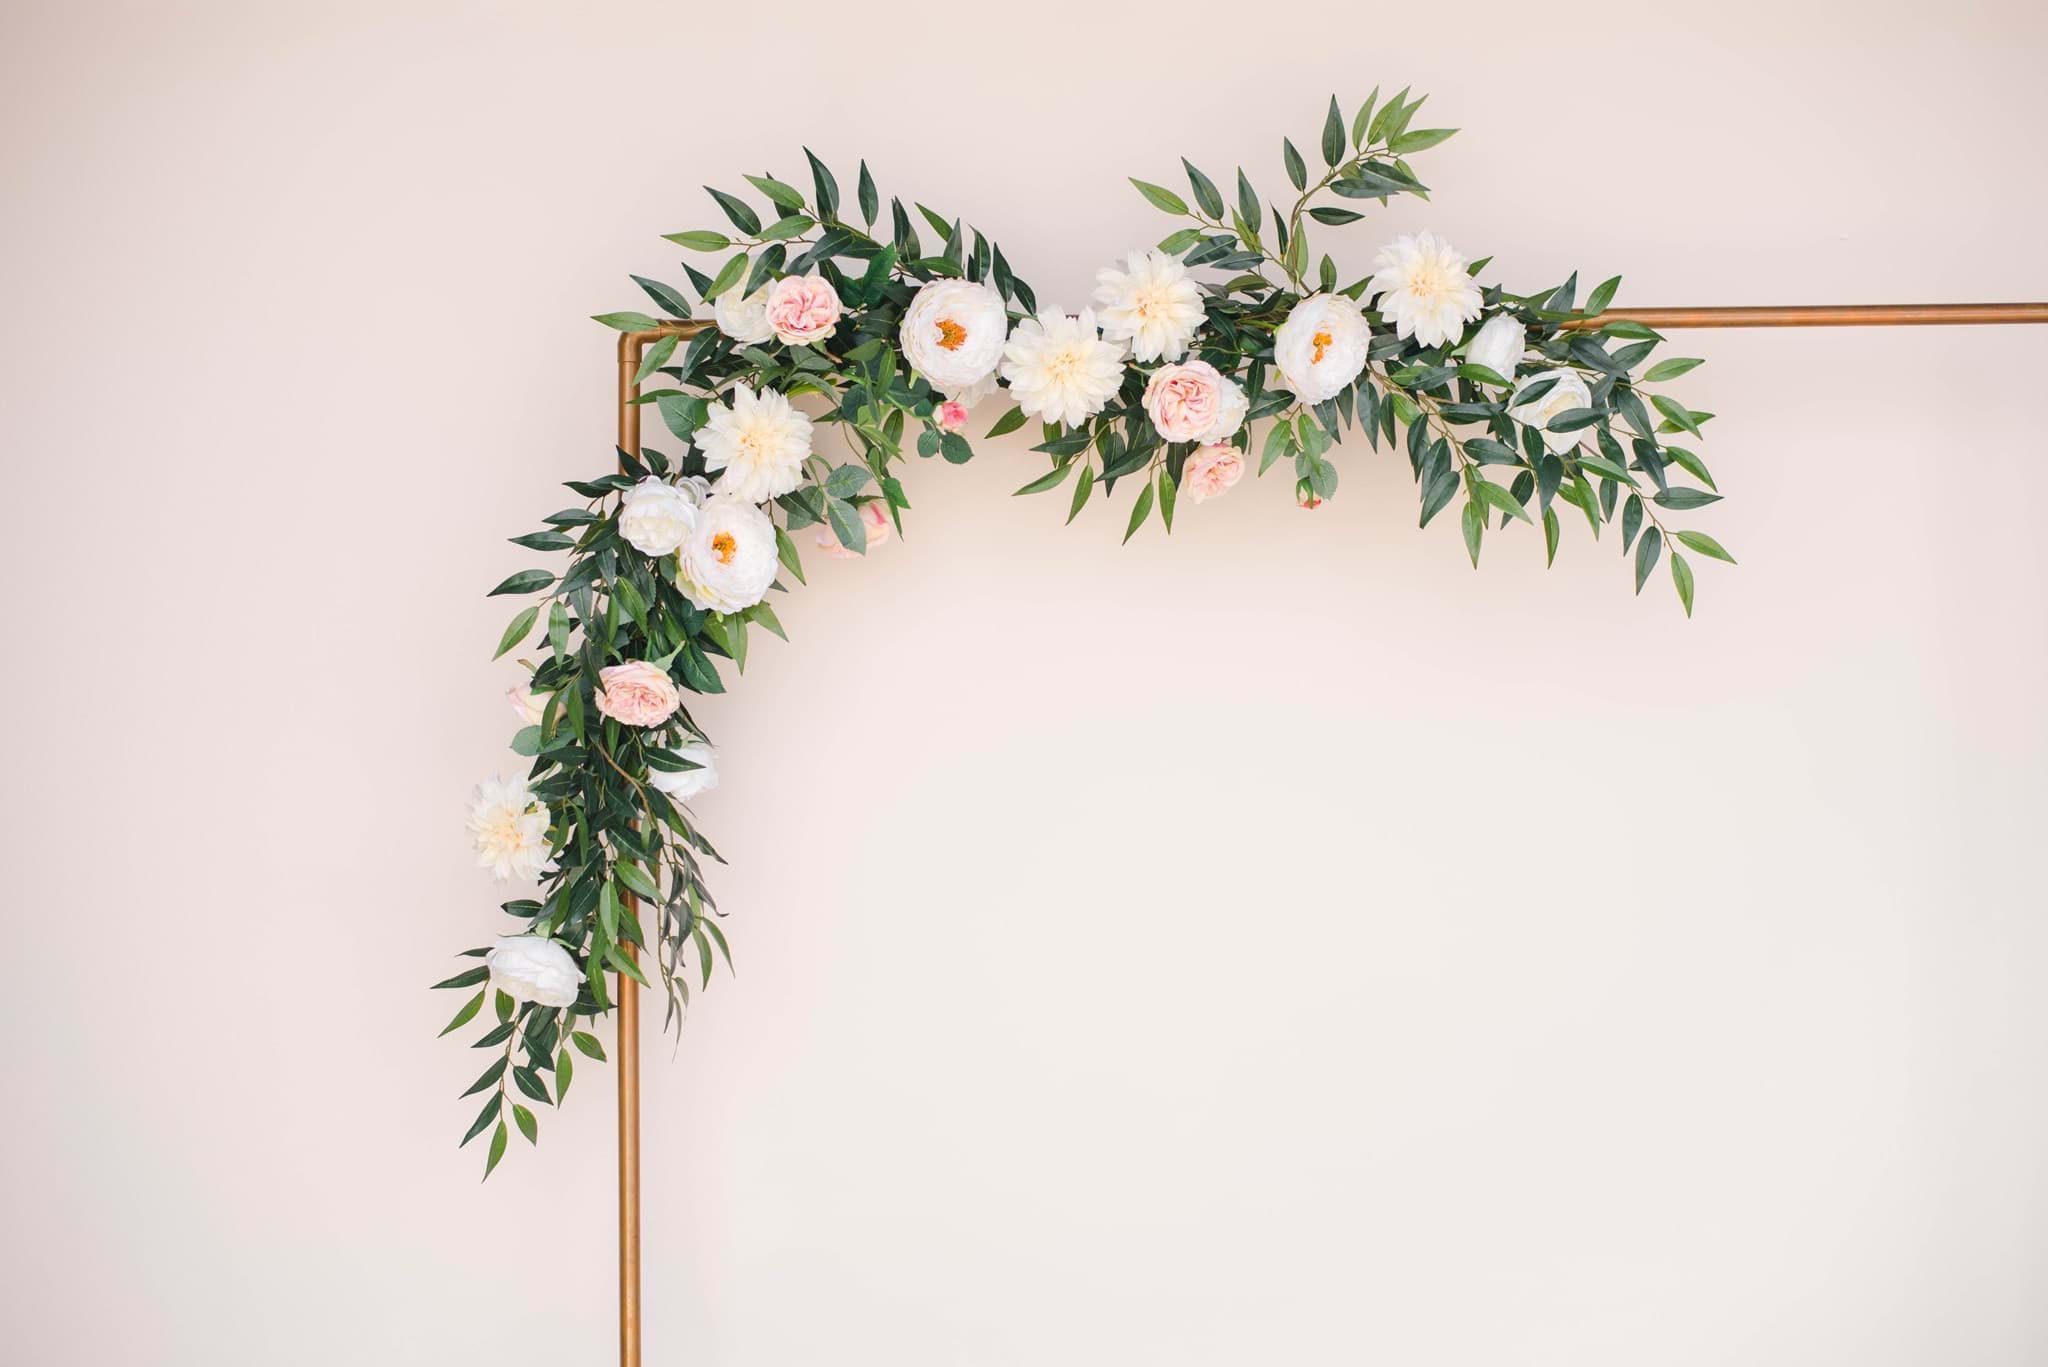 Garlands & Floral - All About You Rentals